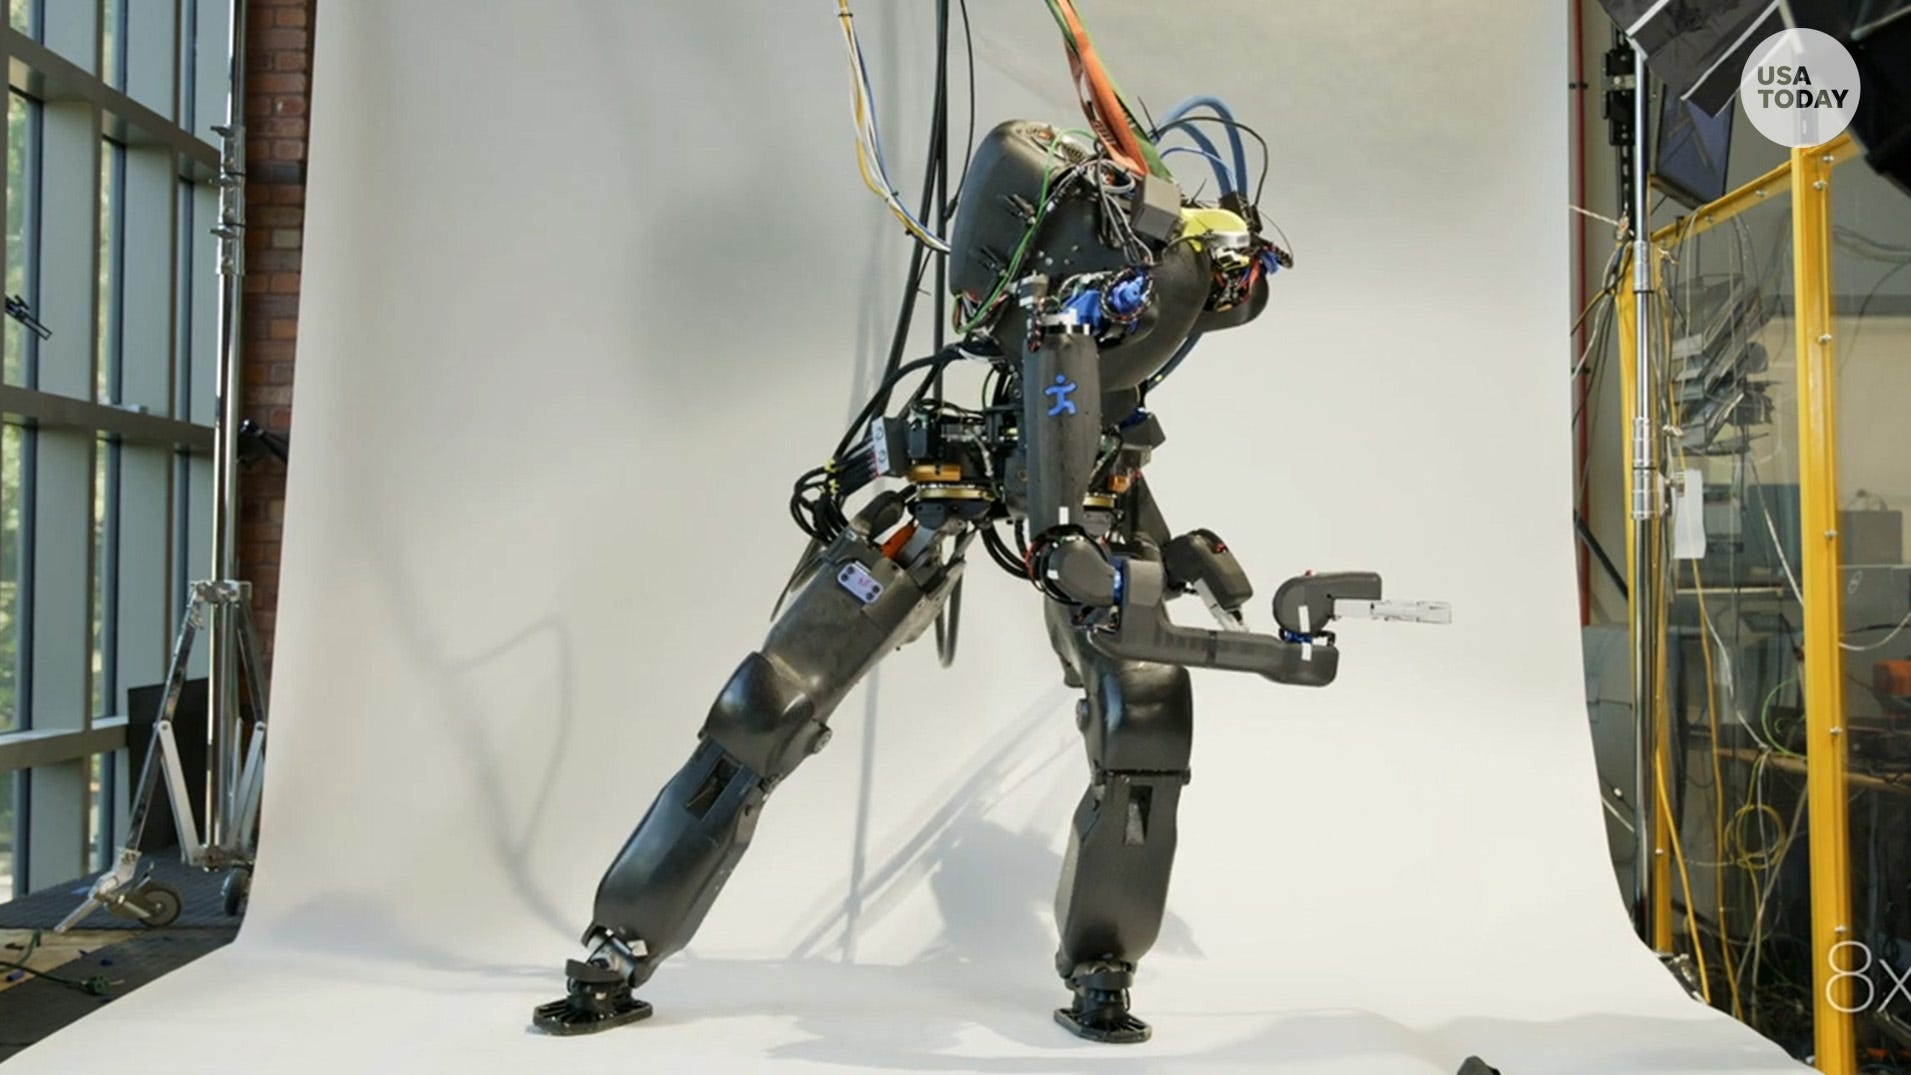 Humanoid robot aims tackle dangerous situations